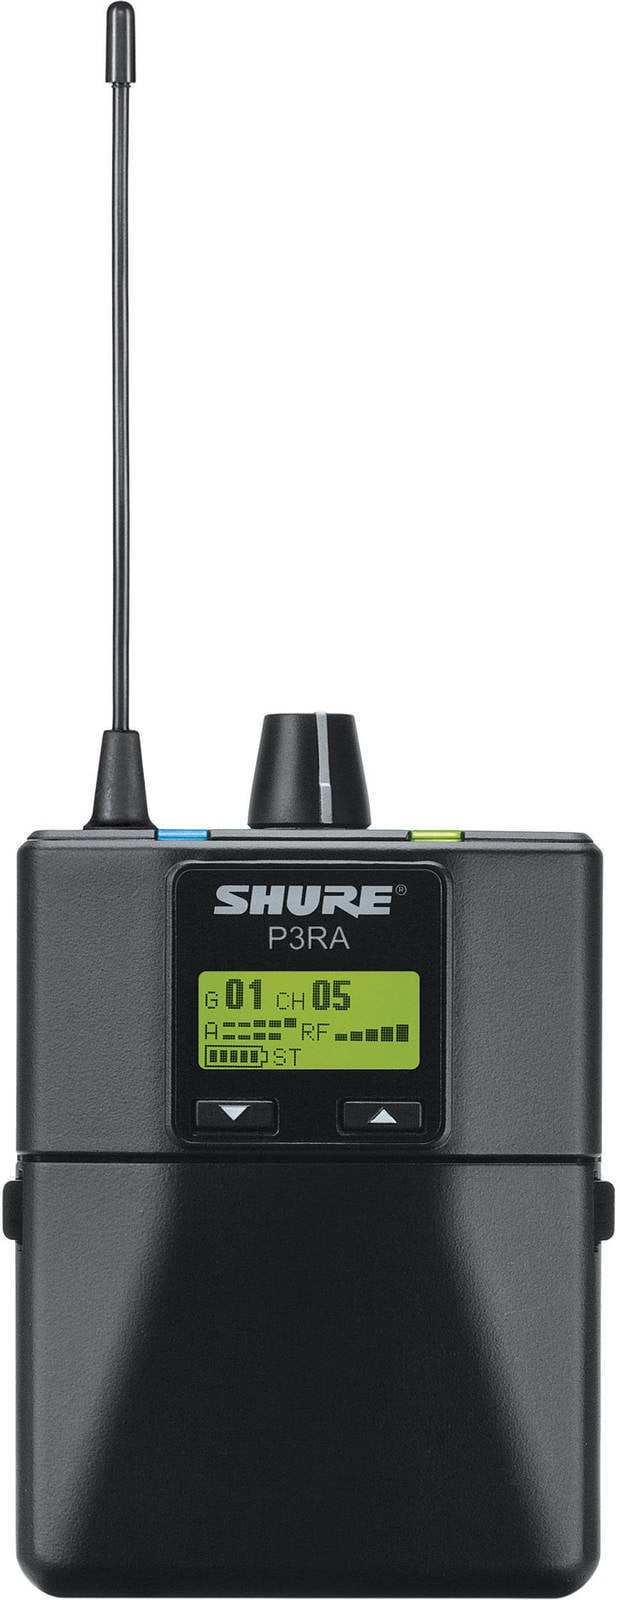 Composant intra-auriculaires Shure P3RA-H20 - PSM 300 Bodypack Receiver H20: 518–542 MHz